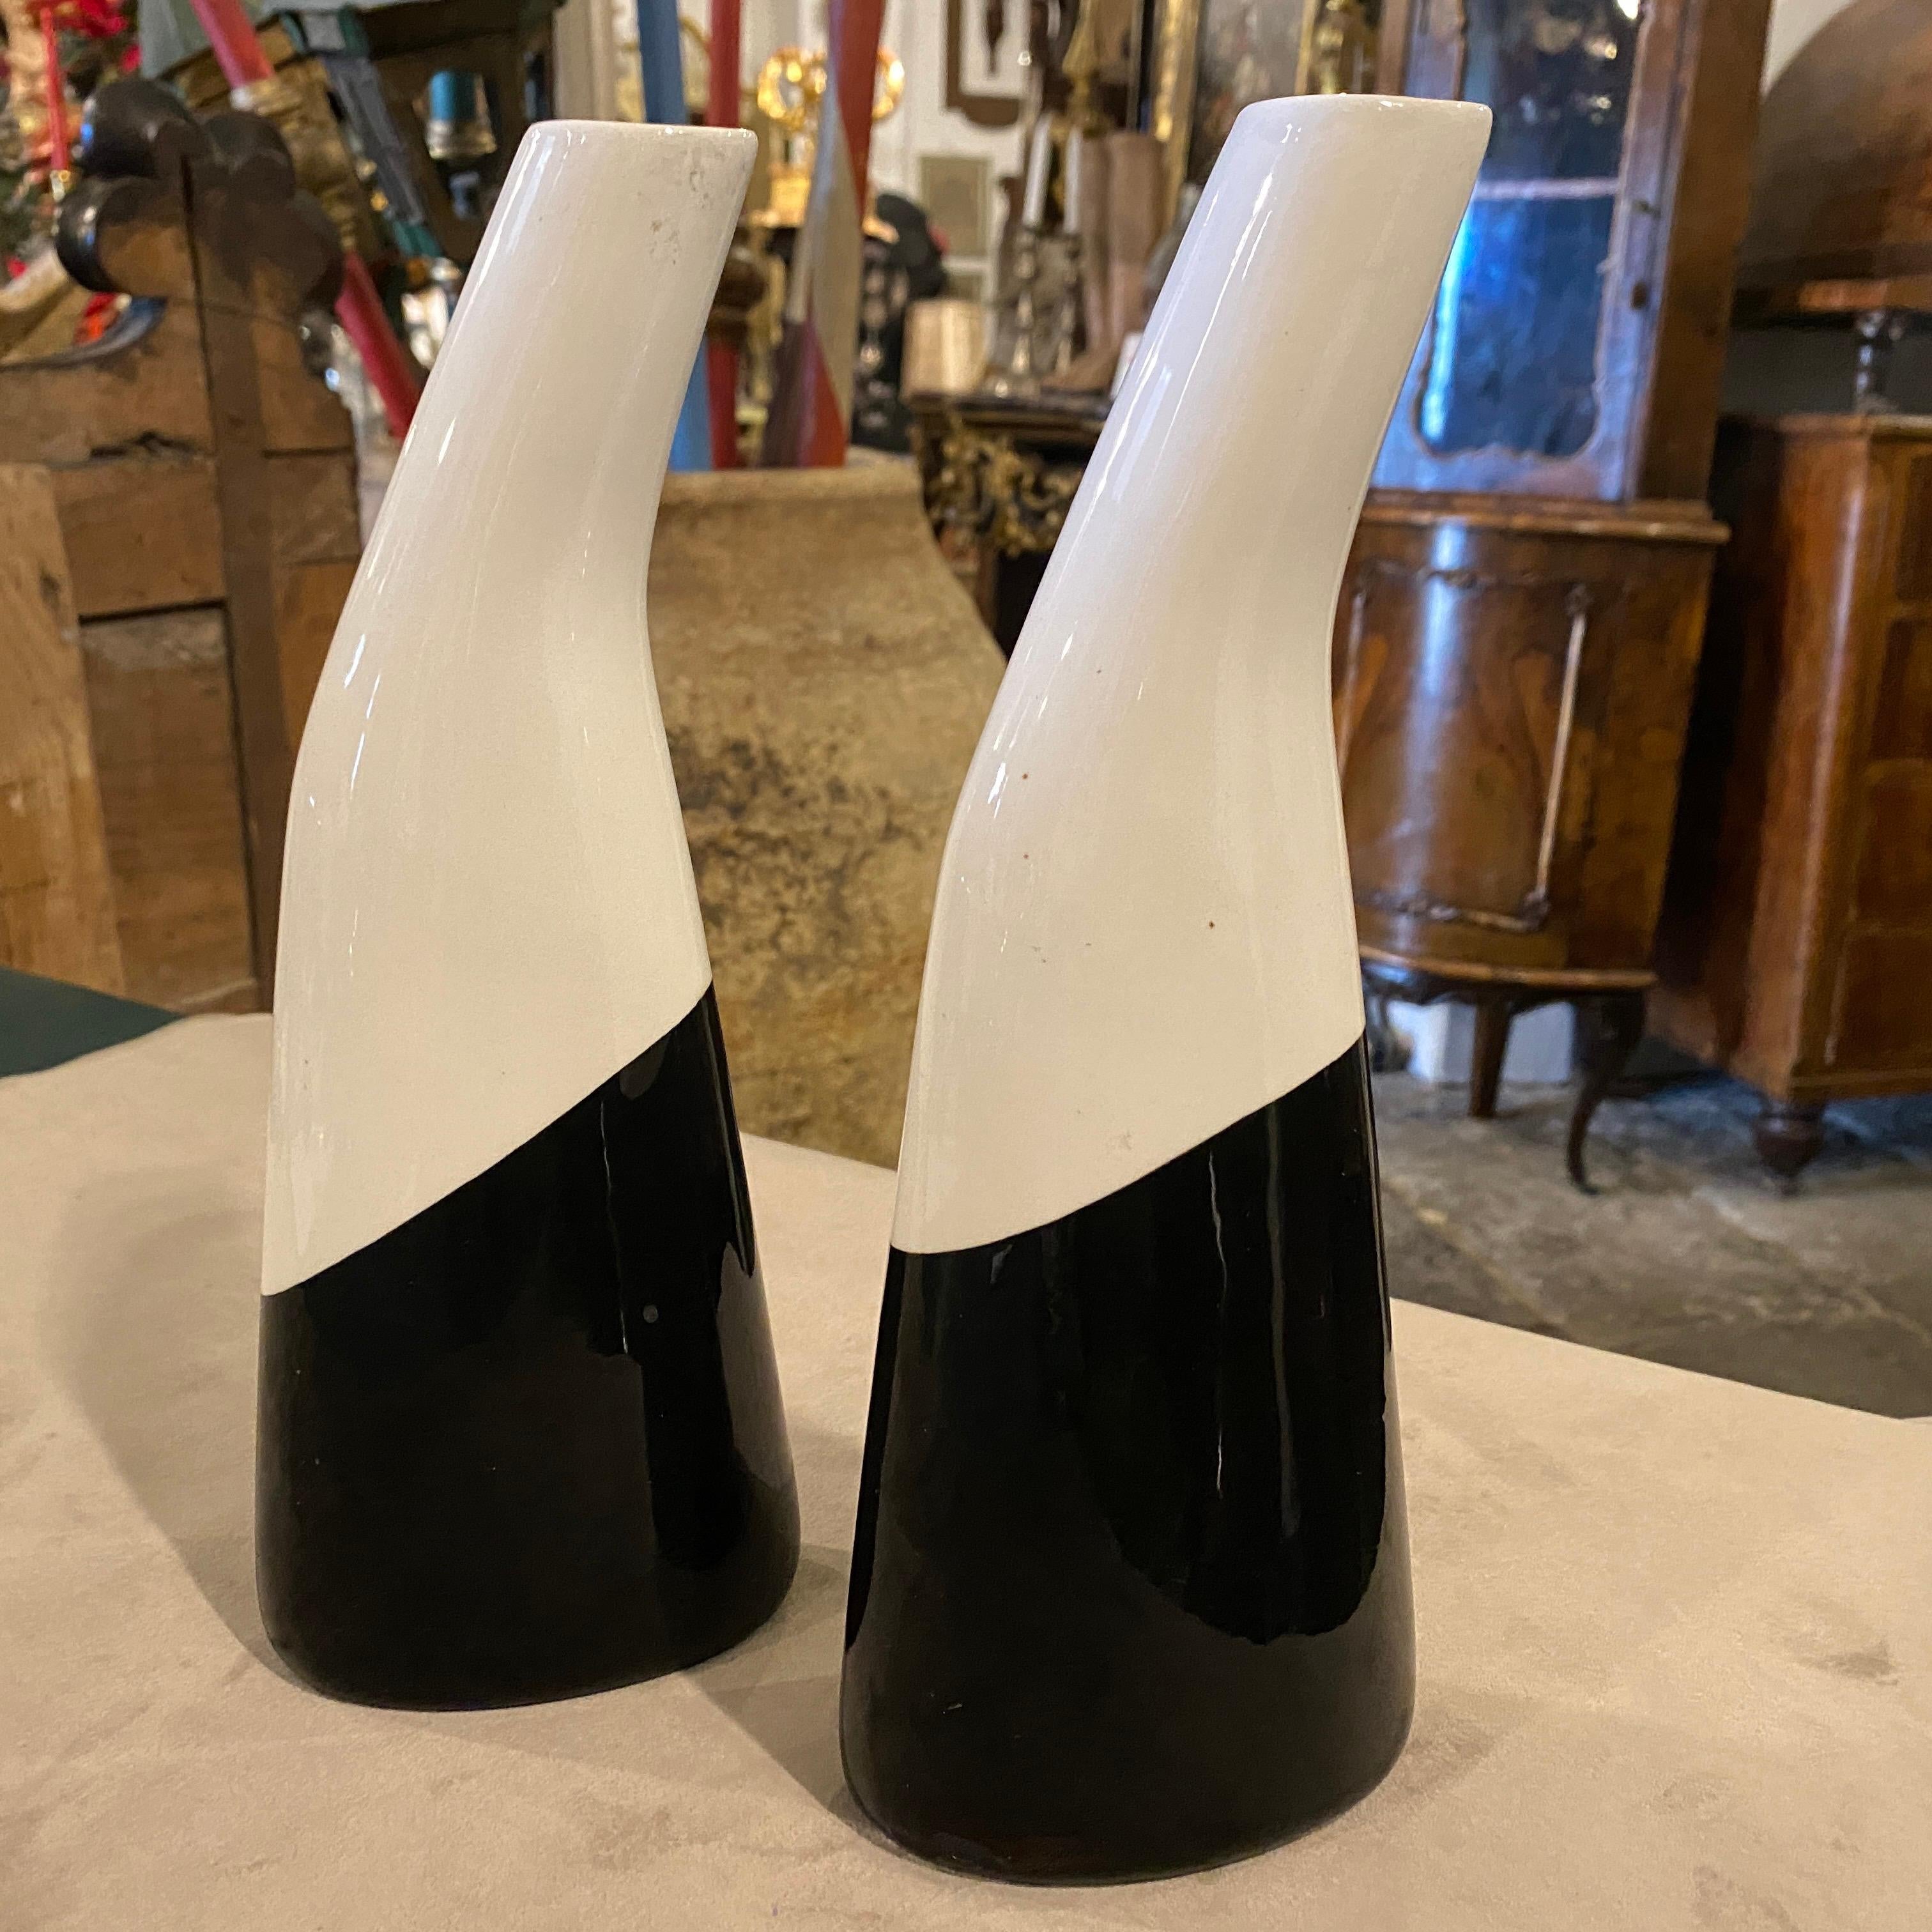 A pair of black and white ceramic vases manufactured in Italy by La Donatella in the Sixties, they are in very good conditions and signed on the bottom. This set is a striking example of mid-century design elegance. Each vase embodies the sleek and